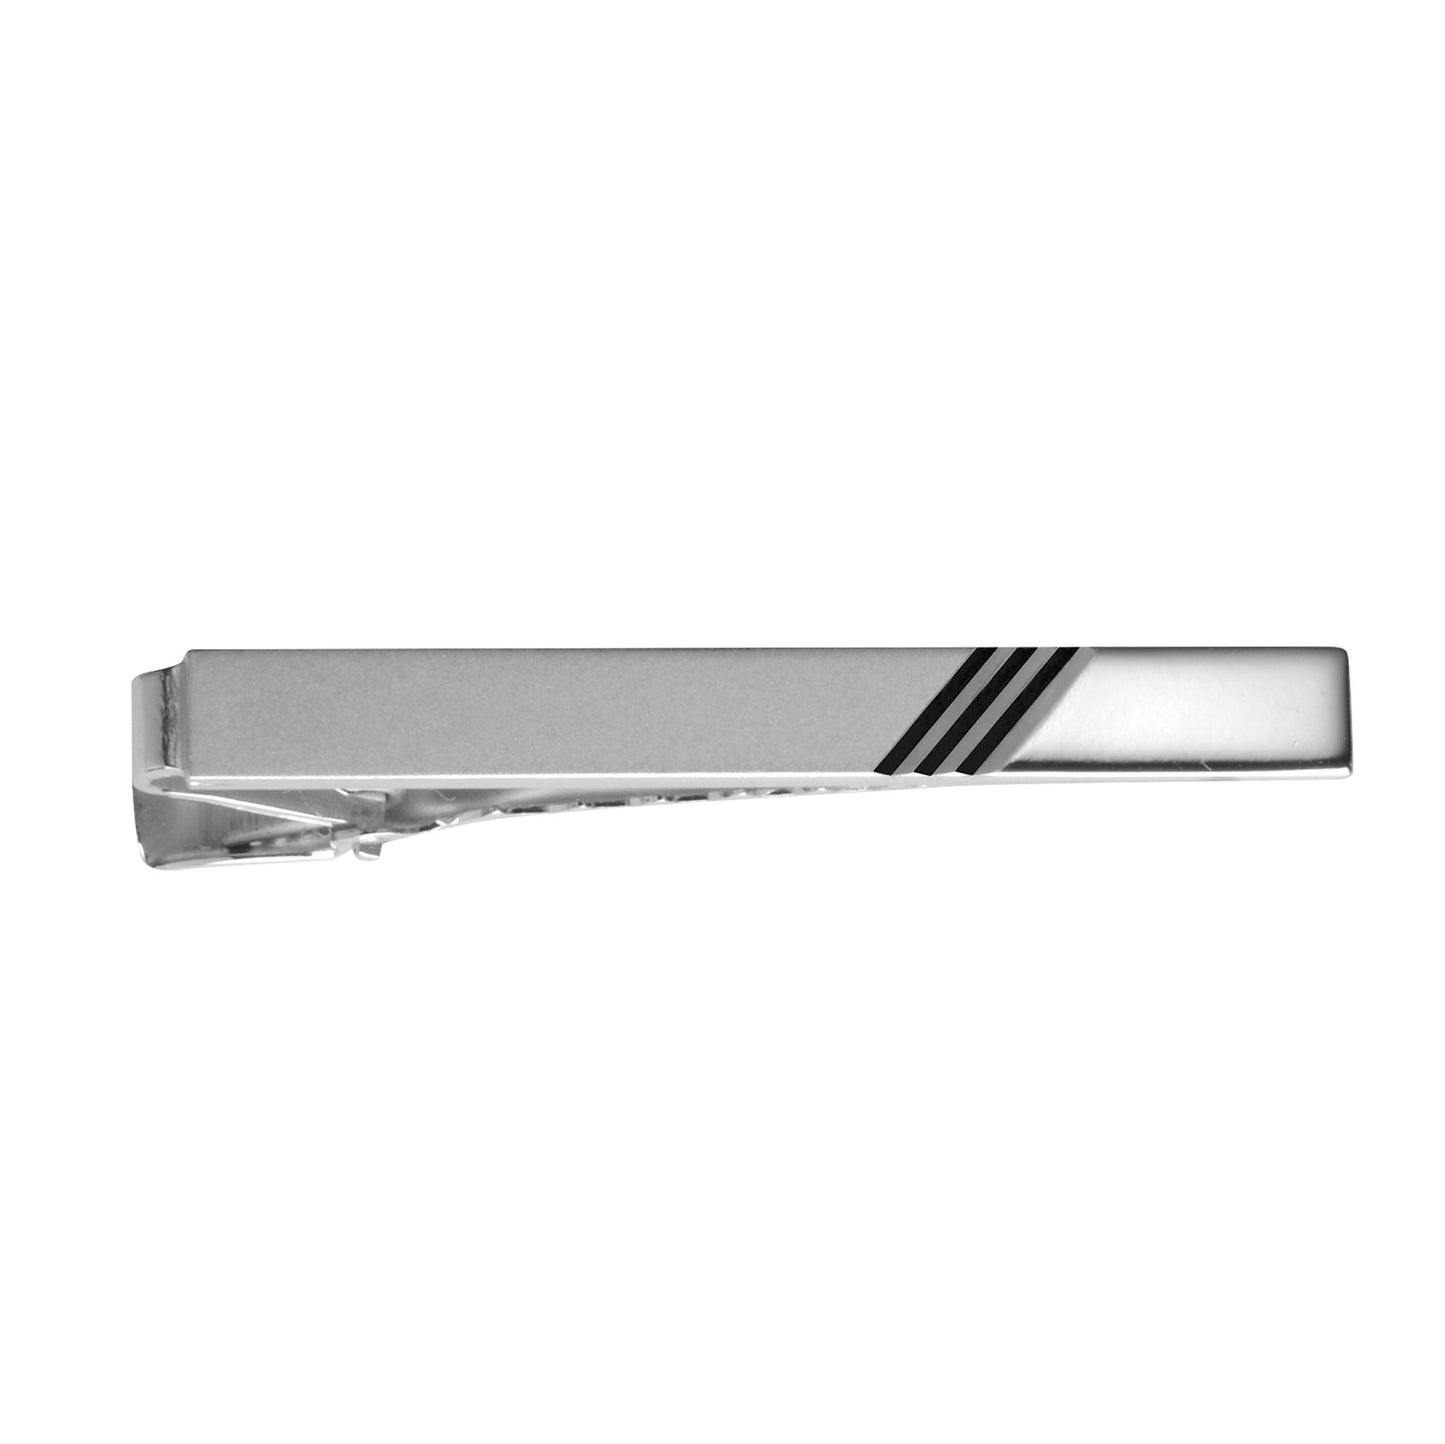 A diamond cut 2 tone tie bar displayed on a neutral white background.